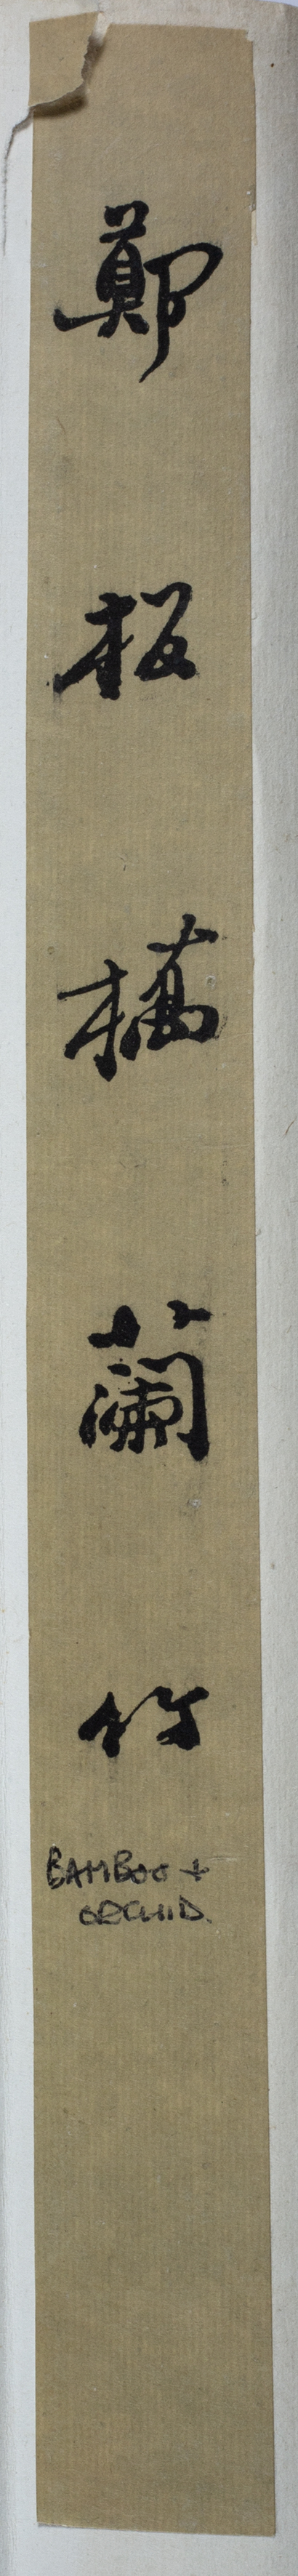 After Zheng Banqiao (1693 - 1765) bamboo, hanging scroll, ink on paper, inscribed, written in Zha - Image 2 of 2